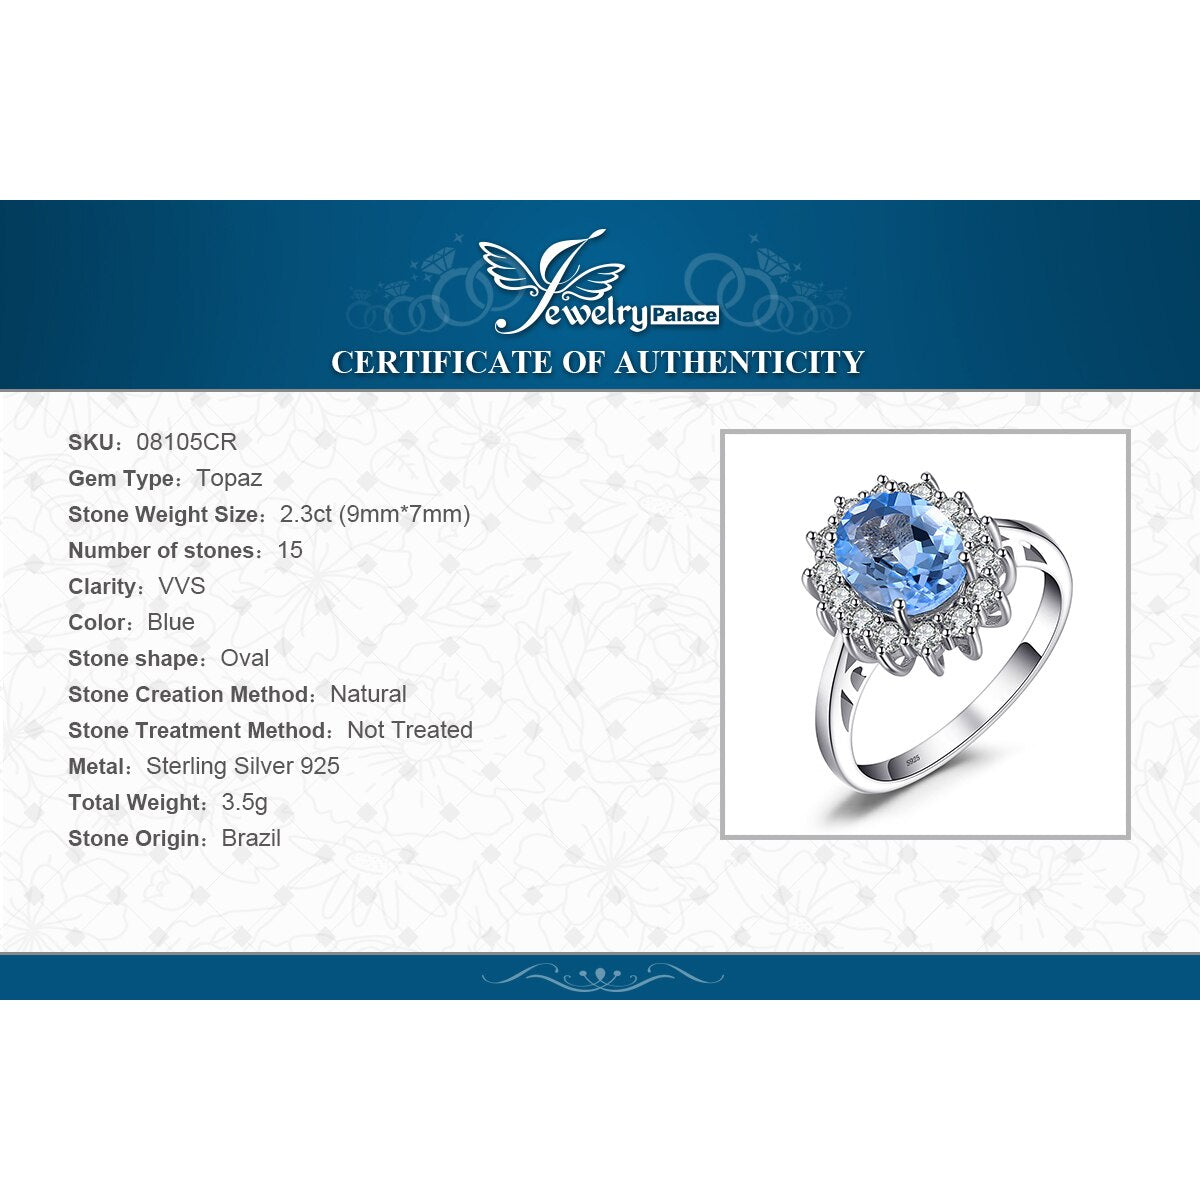 JewelryPalace Princess Diana 2.3ct Natural Blue Topaz 925 Sterling Silver Halo Engagement Ring Women Fashion Gemstone Jewelry